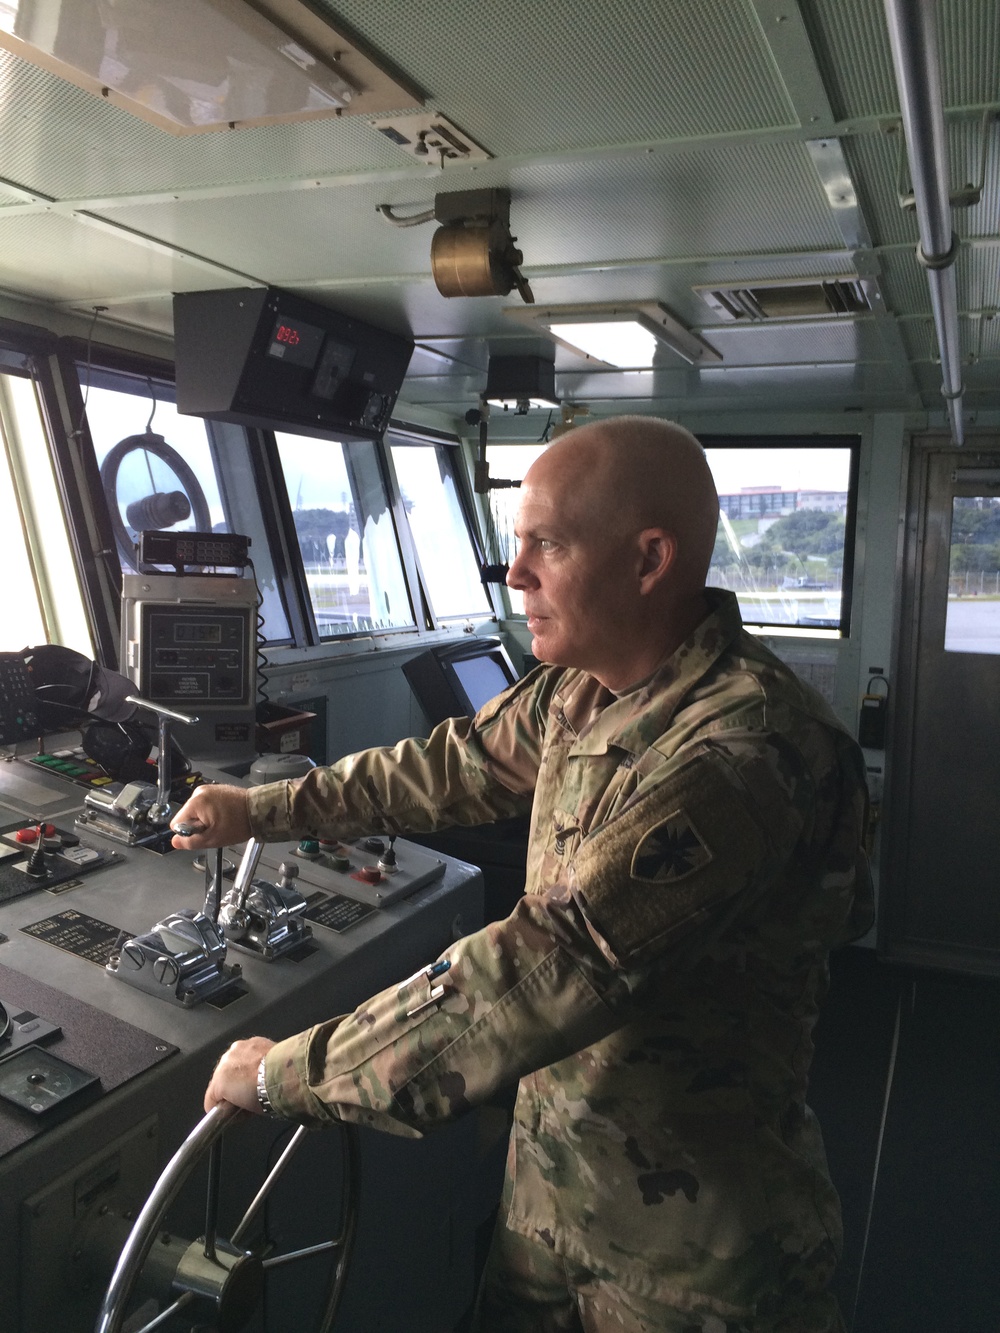 Meet your Army: Kansas City Native Command Sgt. Major Binford speaks the importance of mentoring and developing leaders